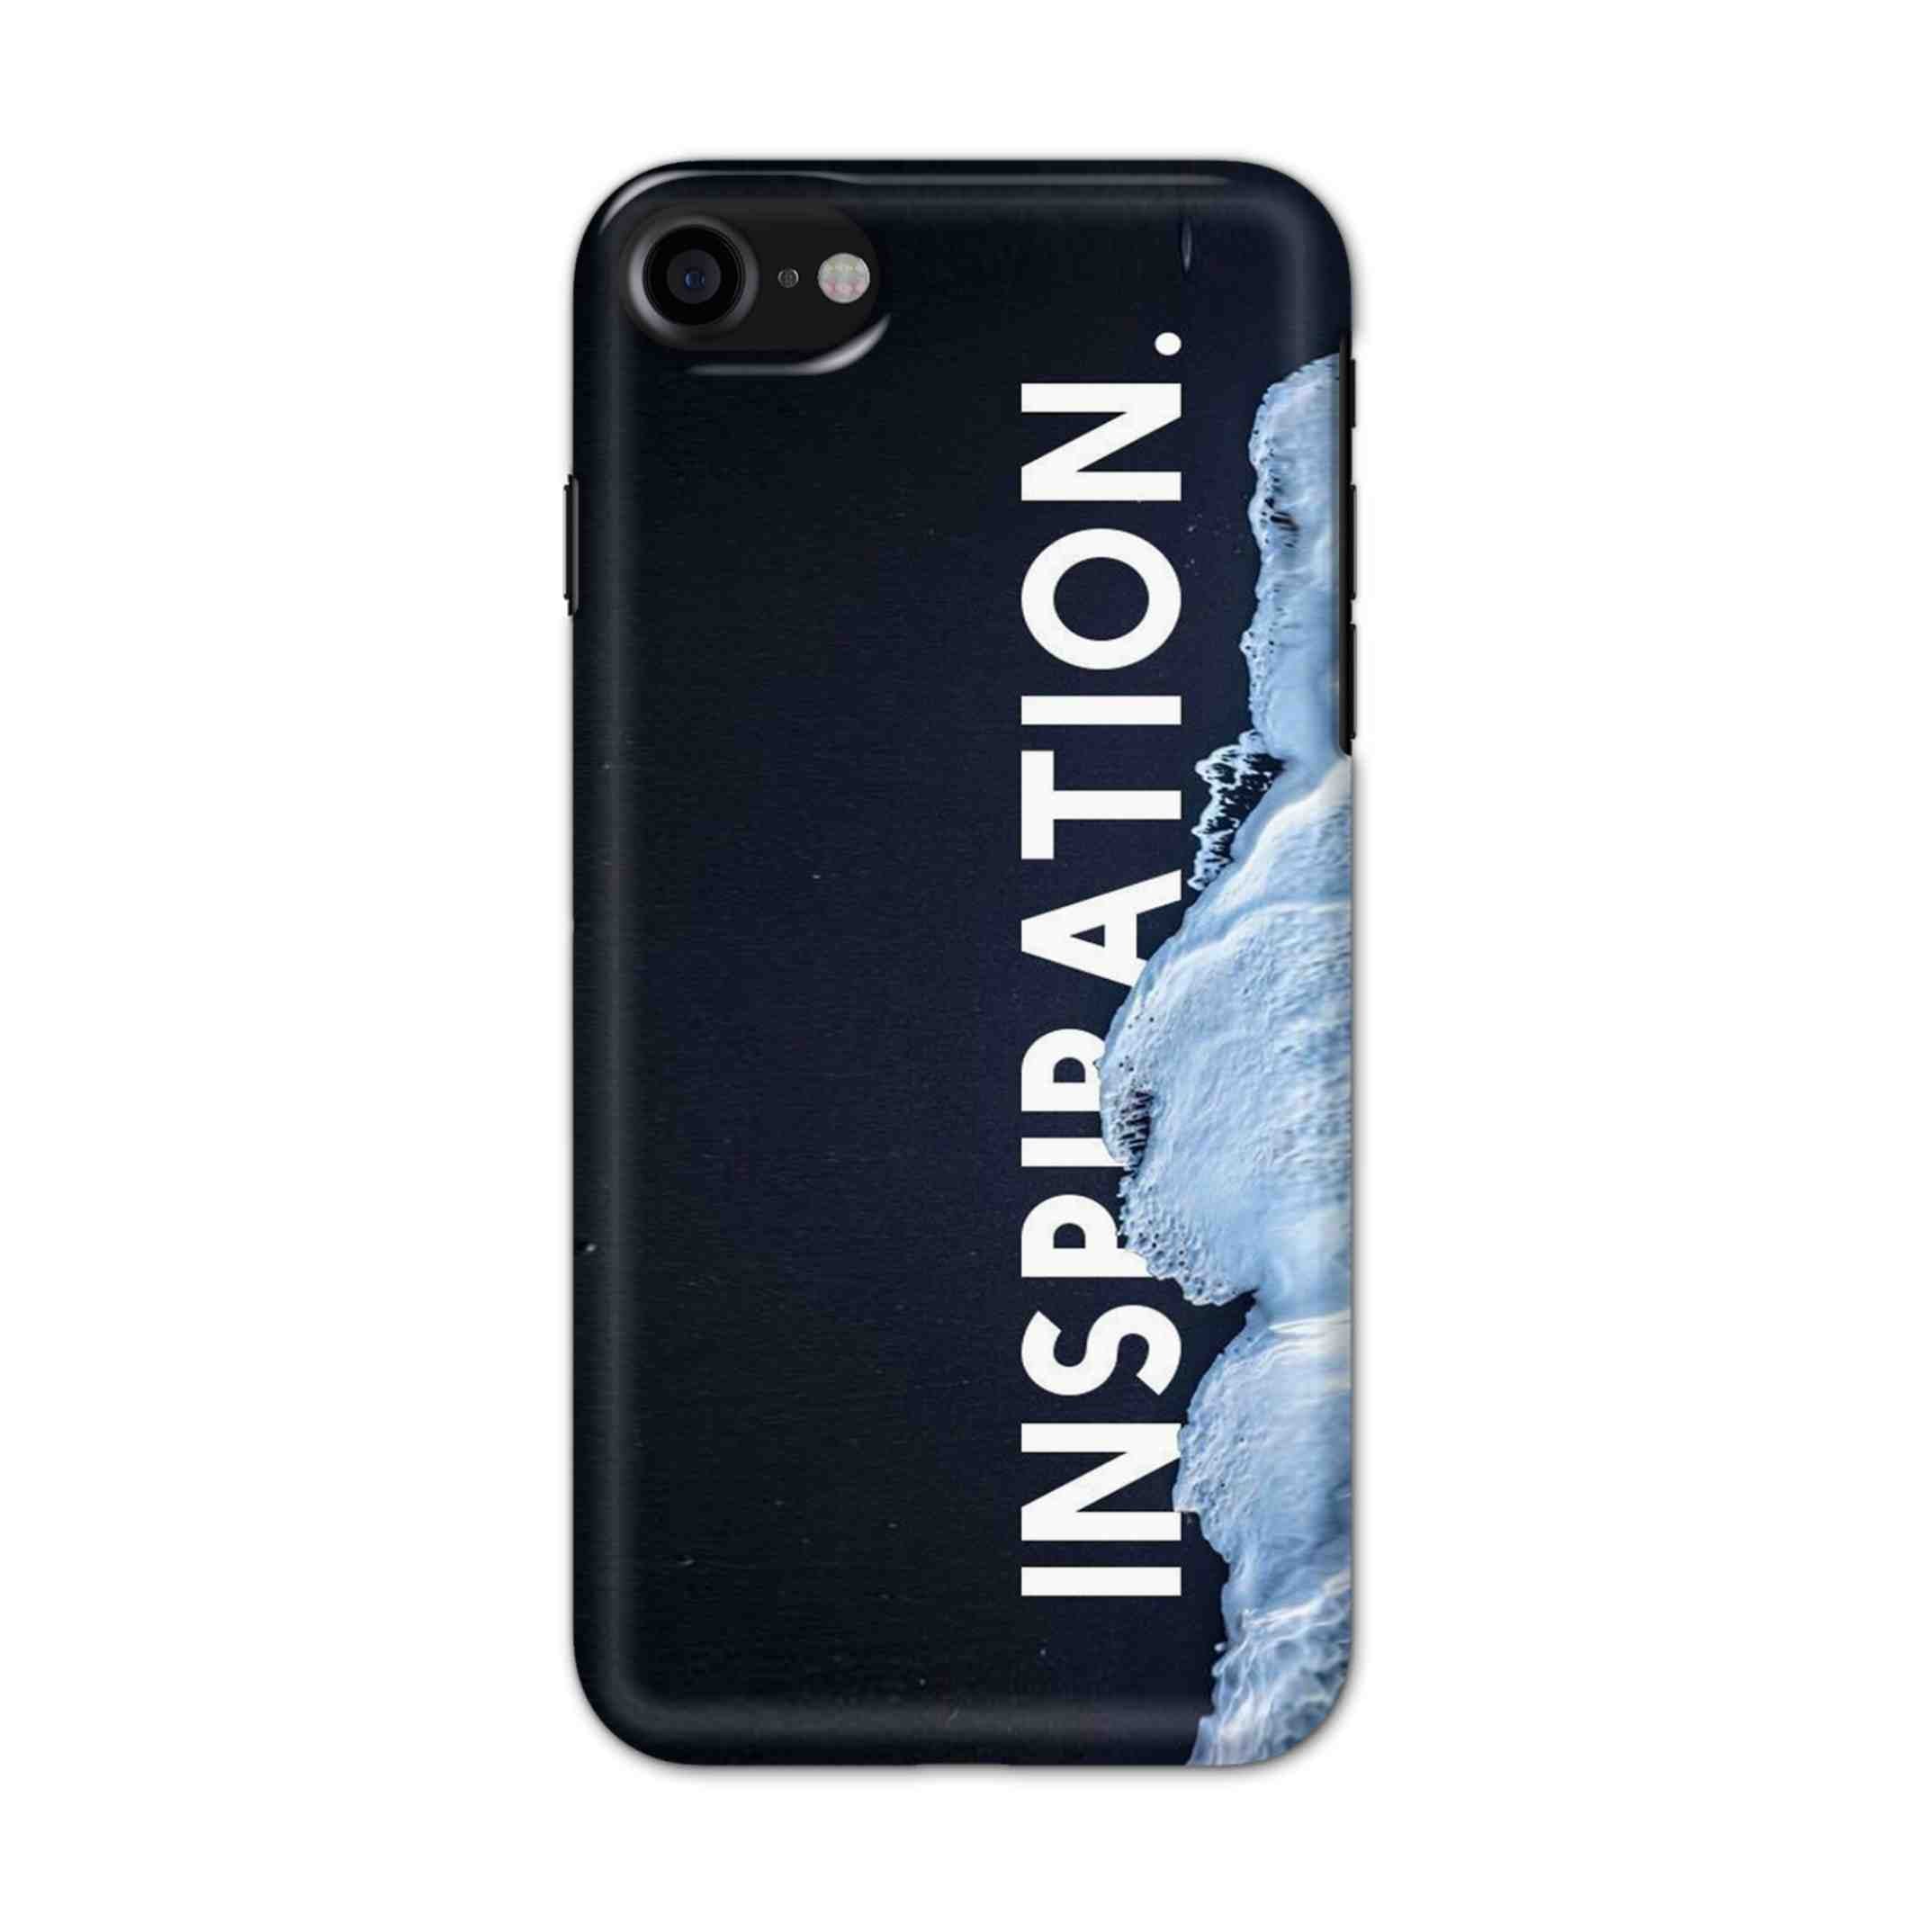 Buy Inspiration Hard Back Mobile Phone Case/Cover For iPhone 7 / 8 Online